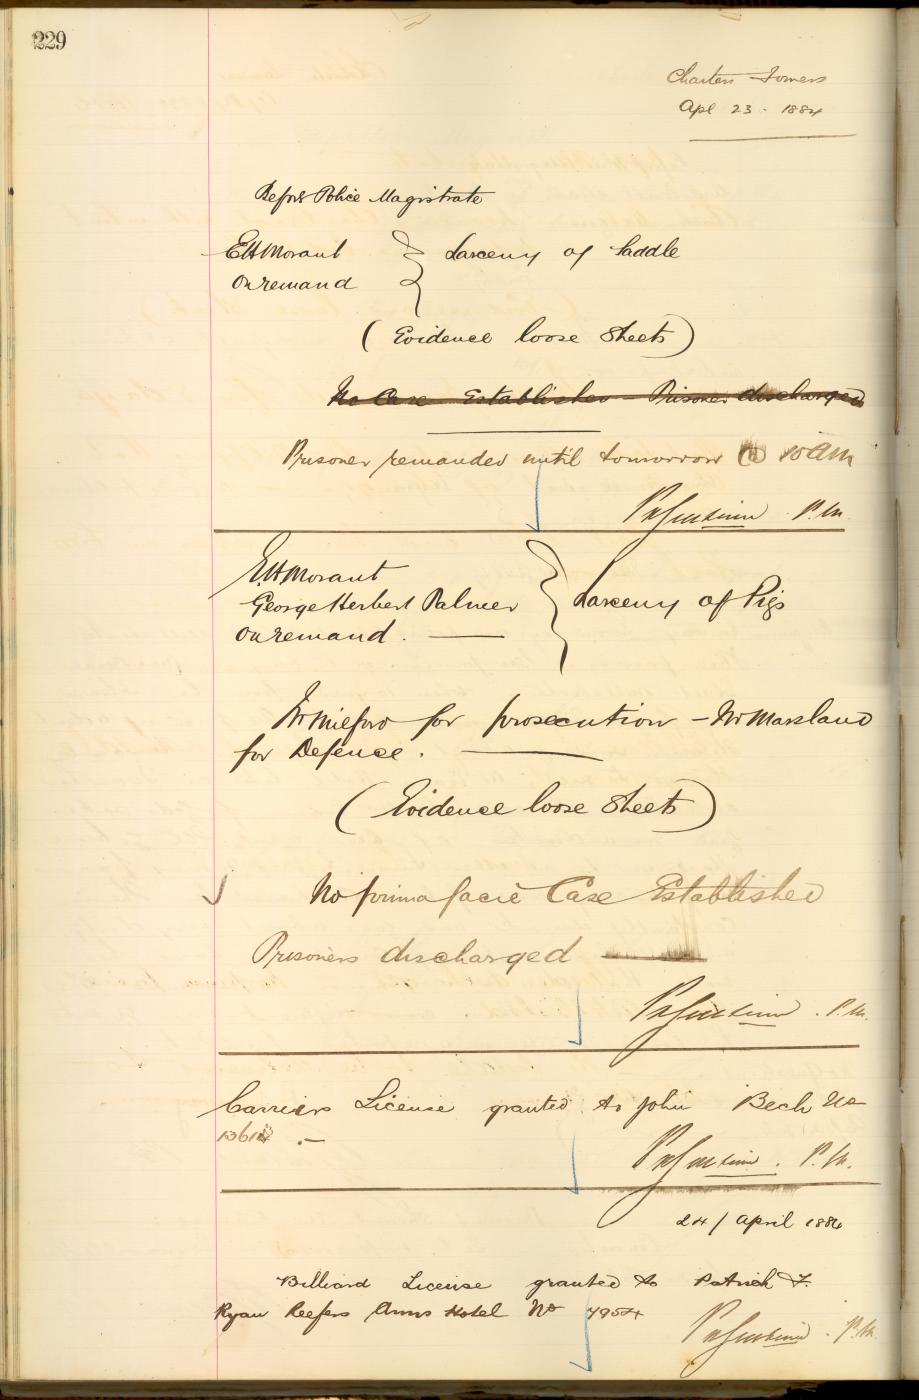 QSA DID 2804: EH Morant’s charge sheets for larceny of pigs and a saddle, dated 23 April 1884